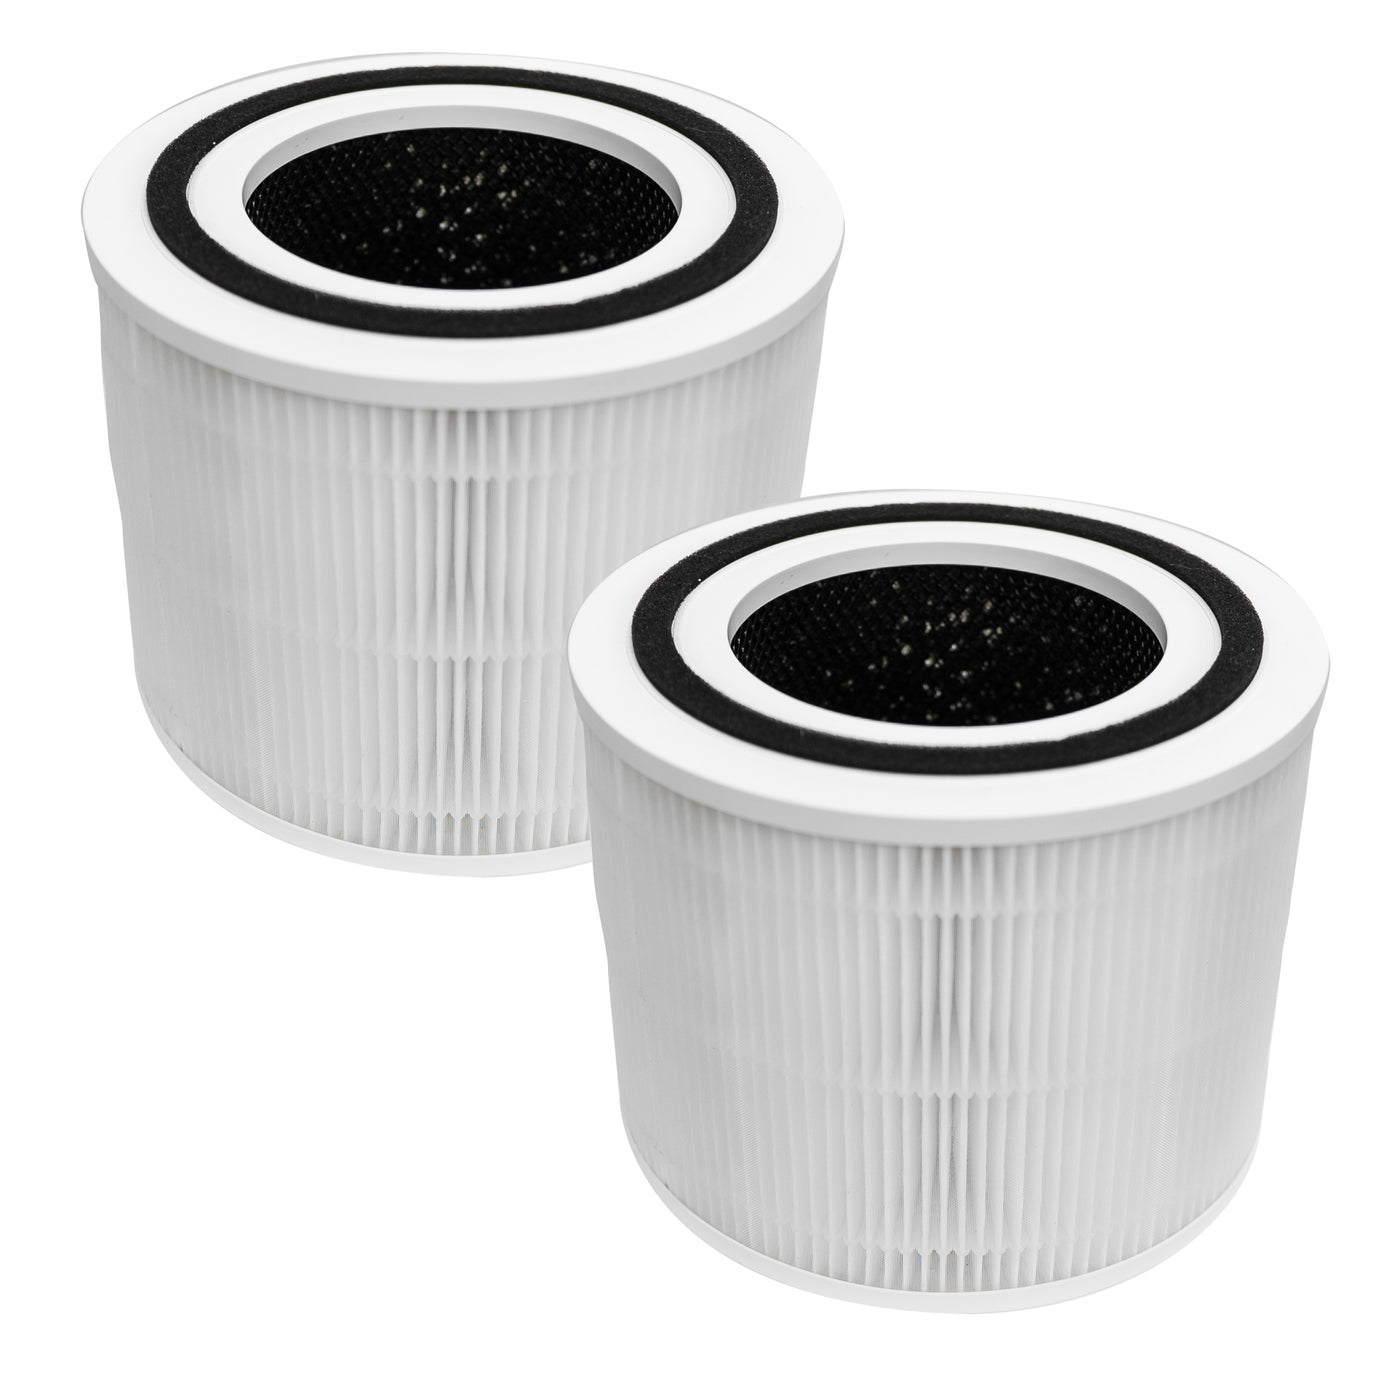 For LEVOIT Core 300 Air Purifier Replacement Filter 1 3in HEPA